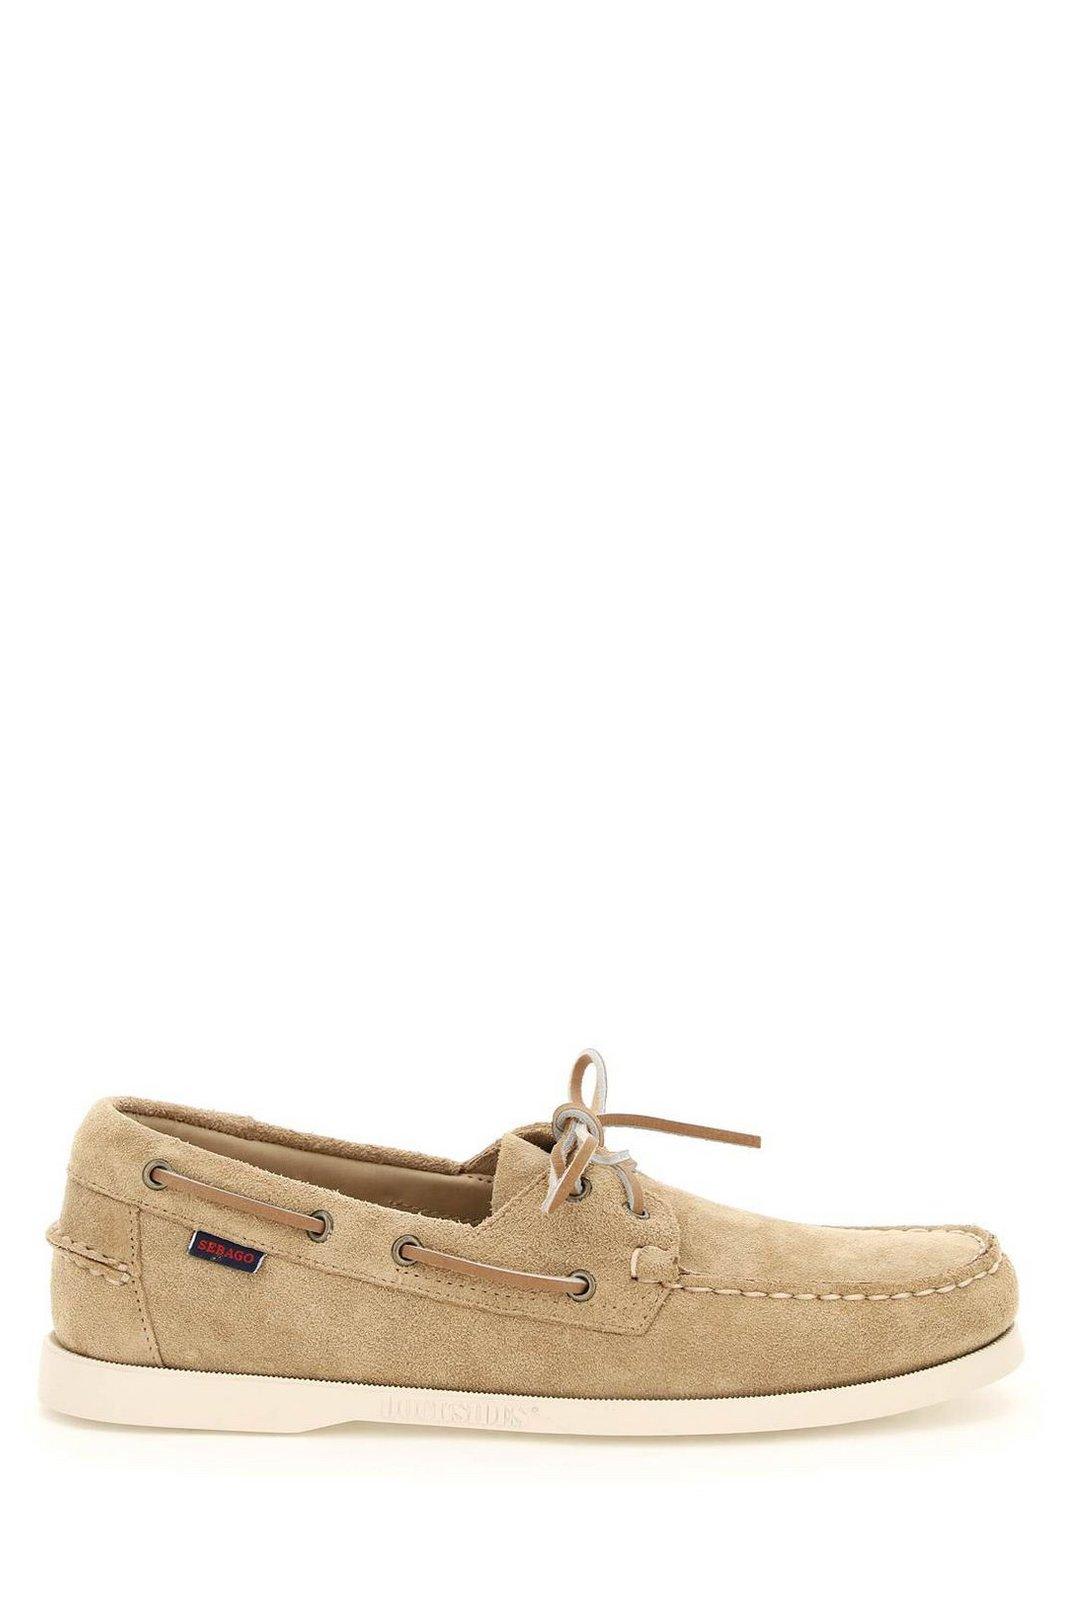 Lace-up Round Toe Boat Shoes